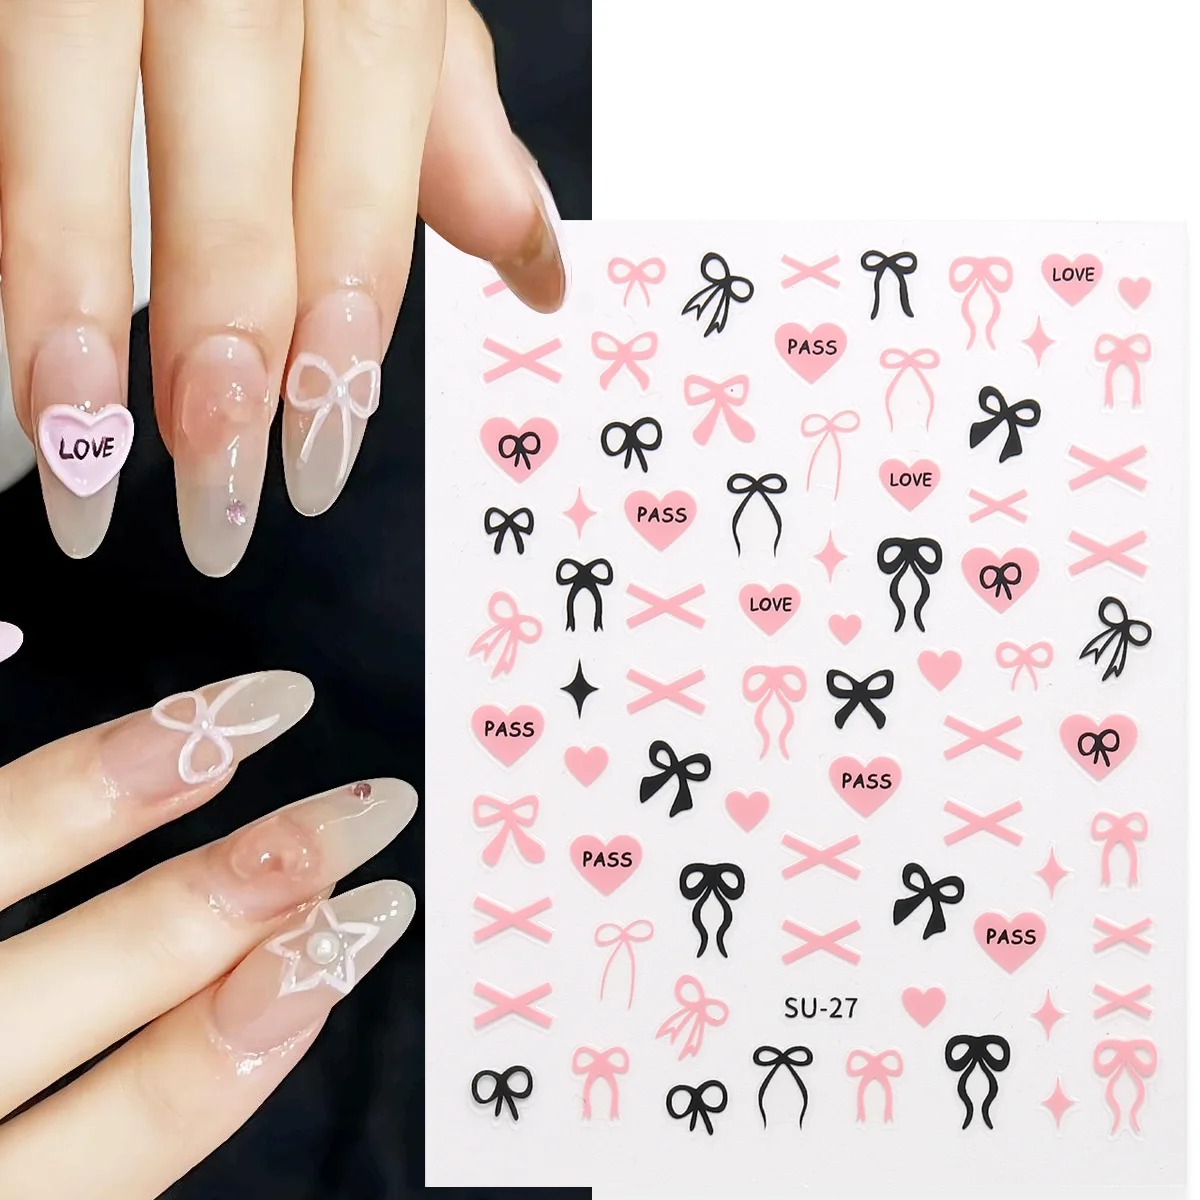 

3D Nail Bow Decors Valentine Pink Bows Love Heart Nail Stickers Cute Bowknot Ribbons Nail Decals Bow-tie Manicure Supplies SU-27